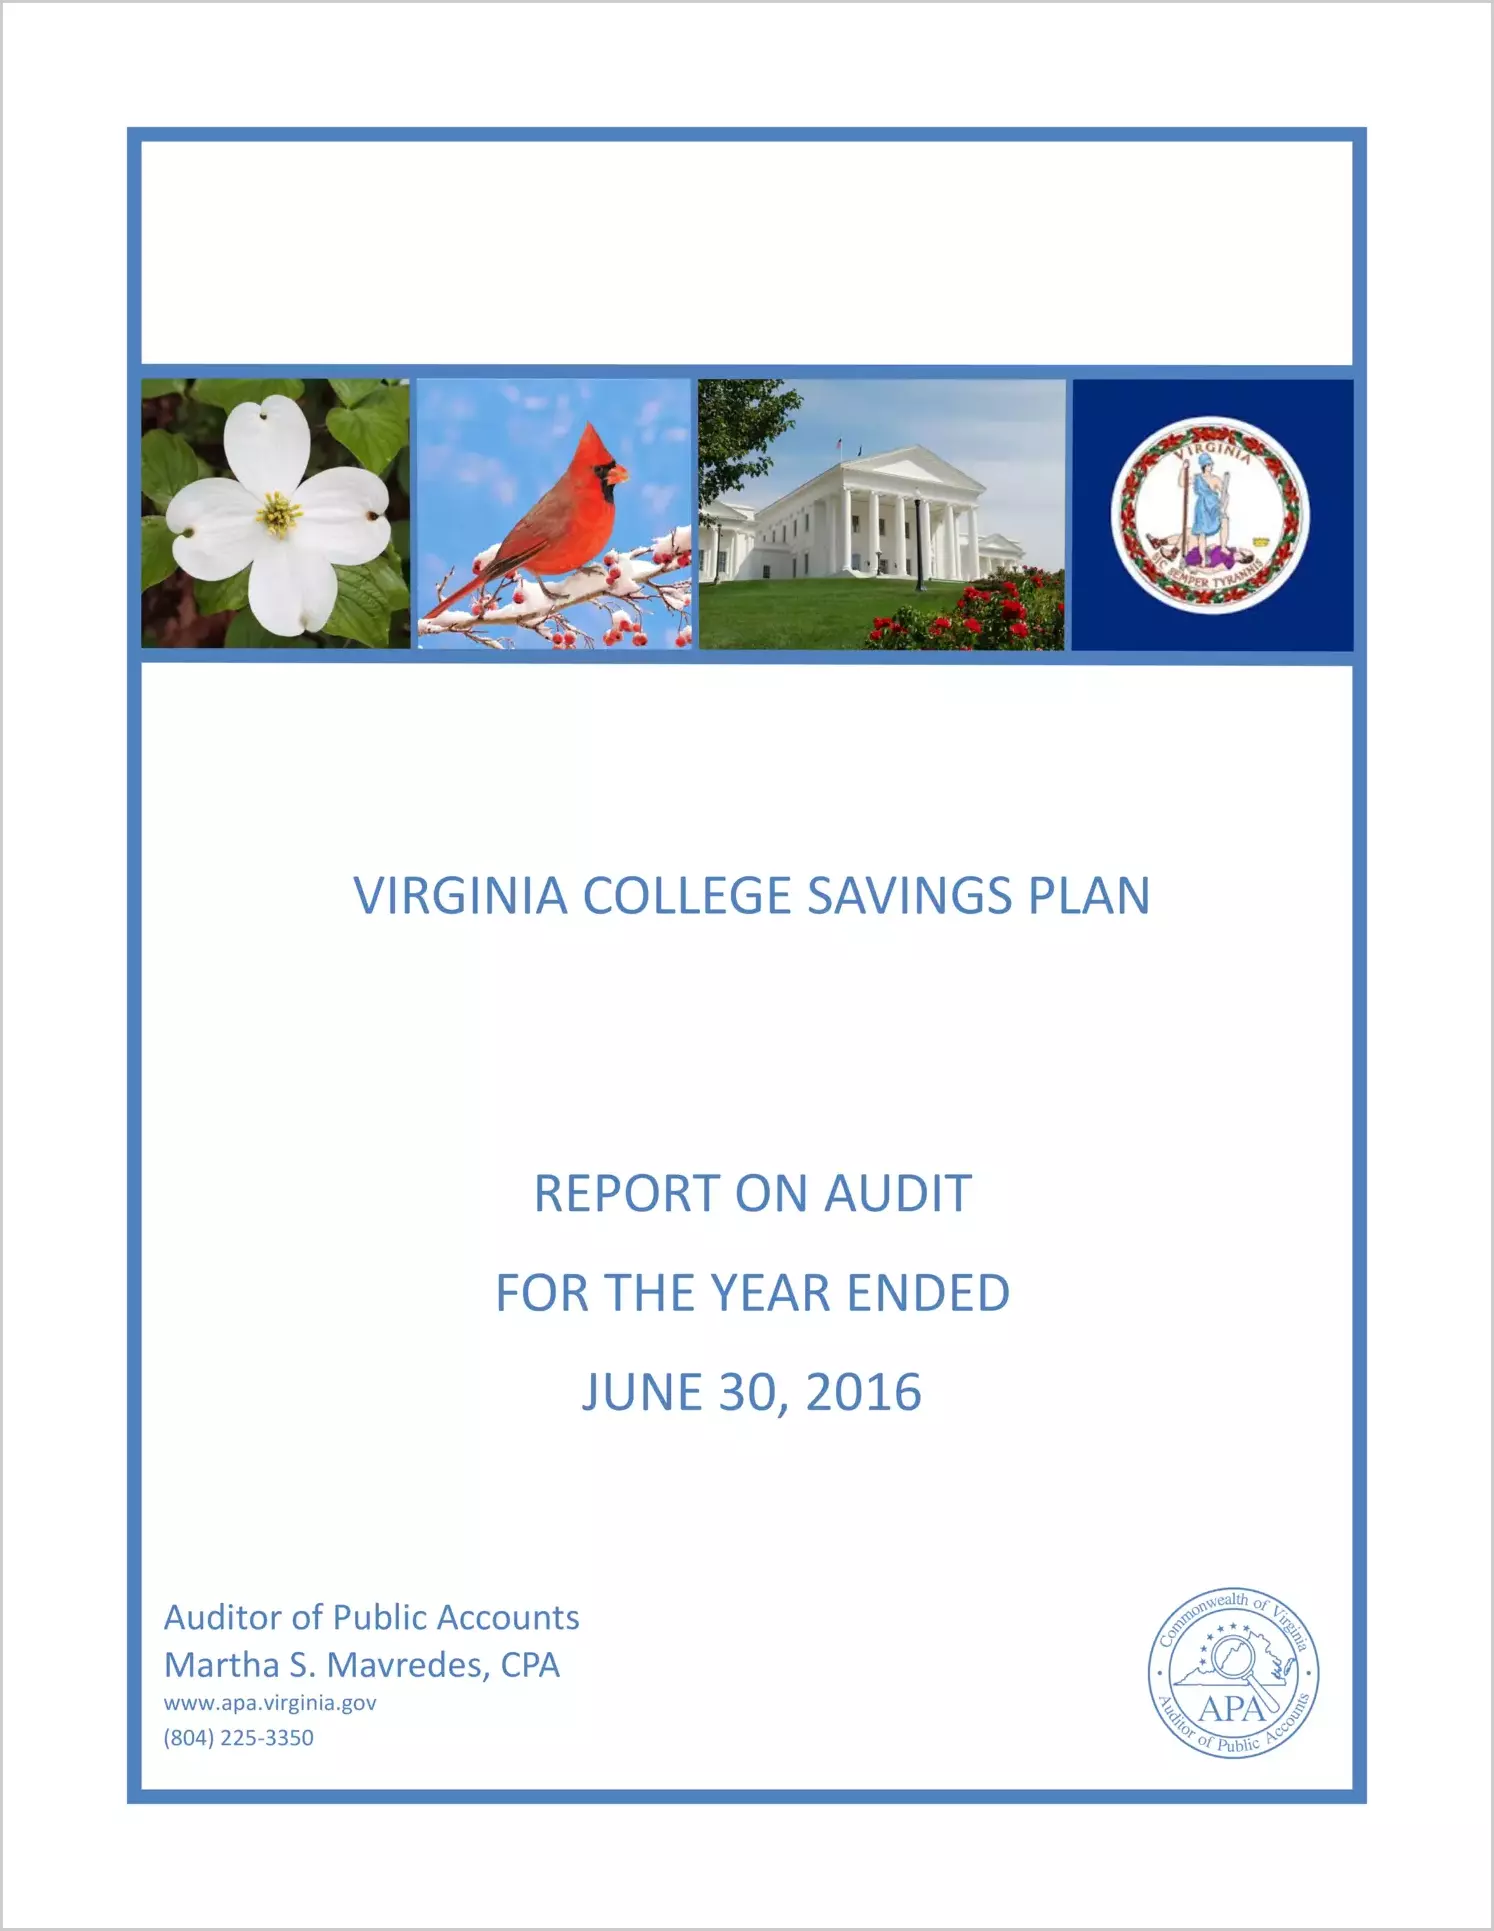 Virginia College Savings Plan for the year ended June 30, 2016